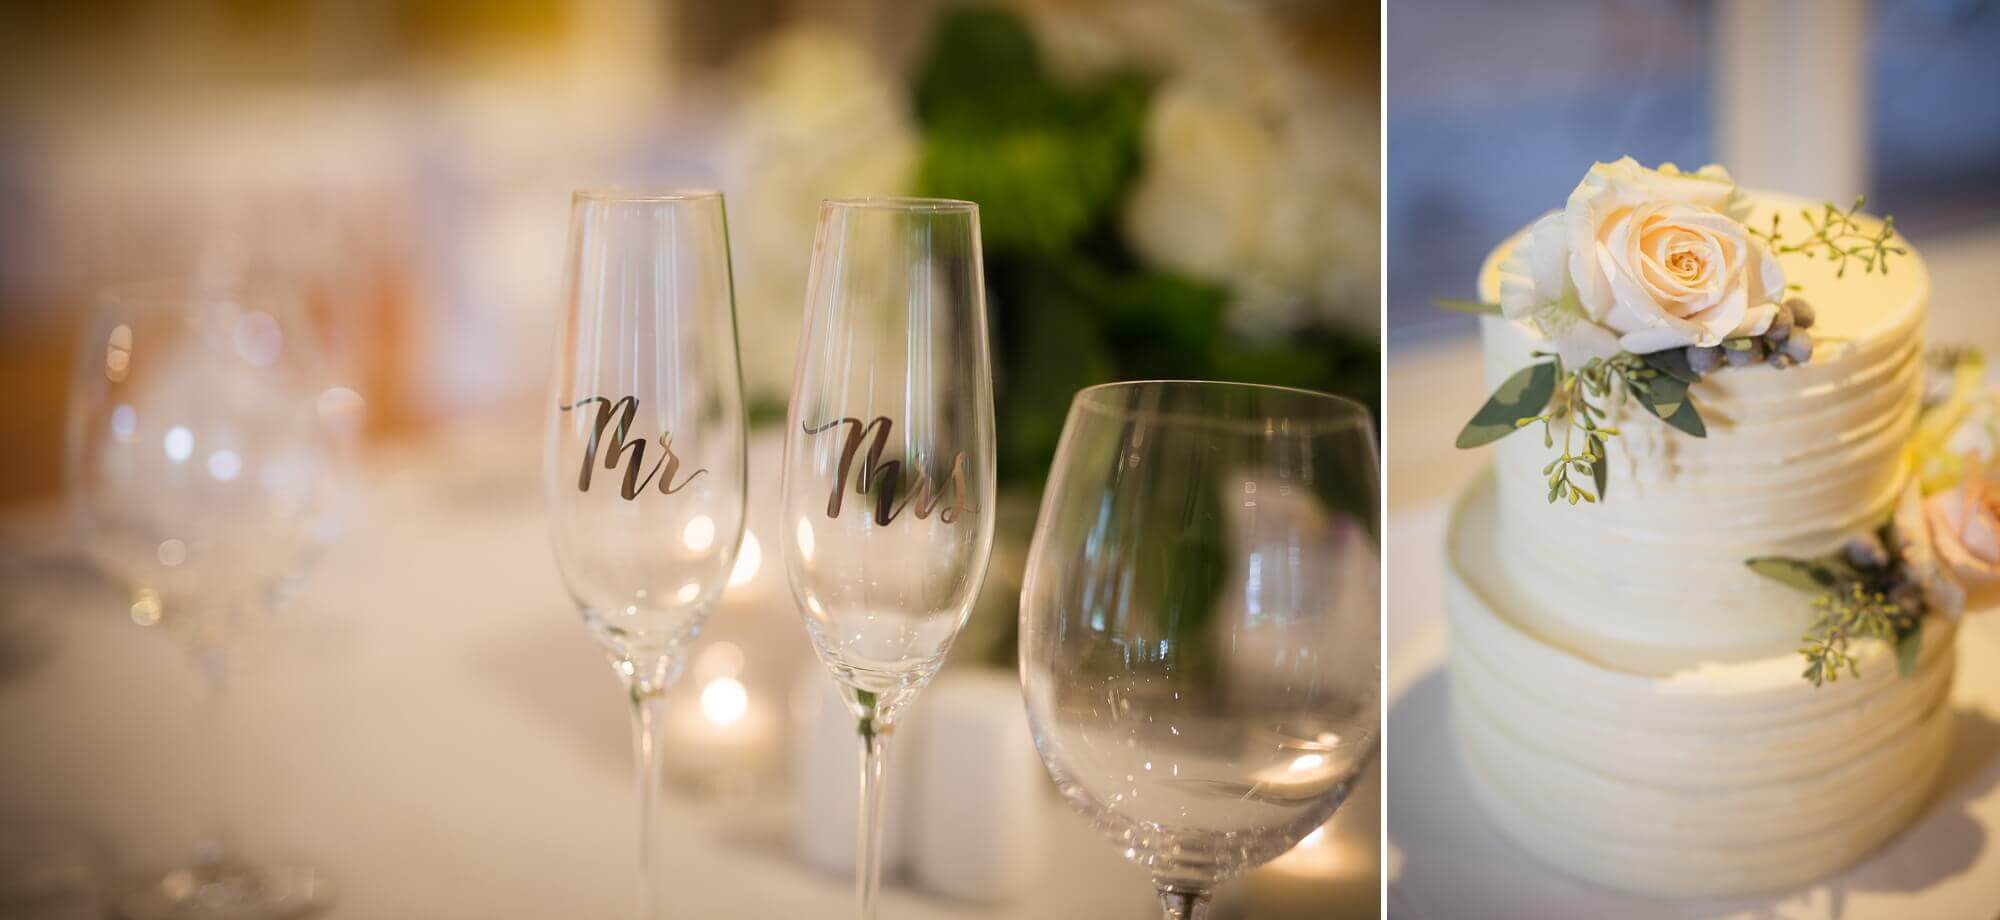 Details of the bride and grooms champagne glasses and wedding cake at Lambton Golf & Country Club